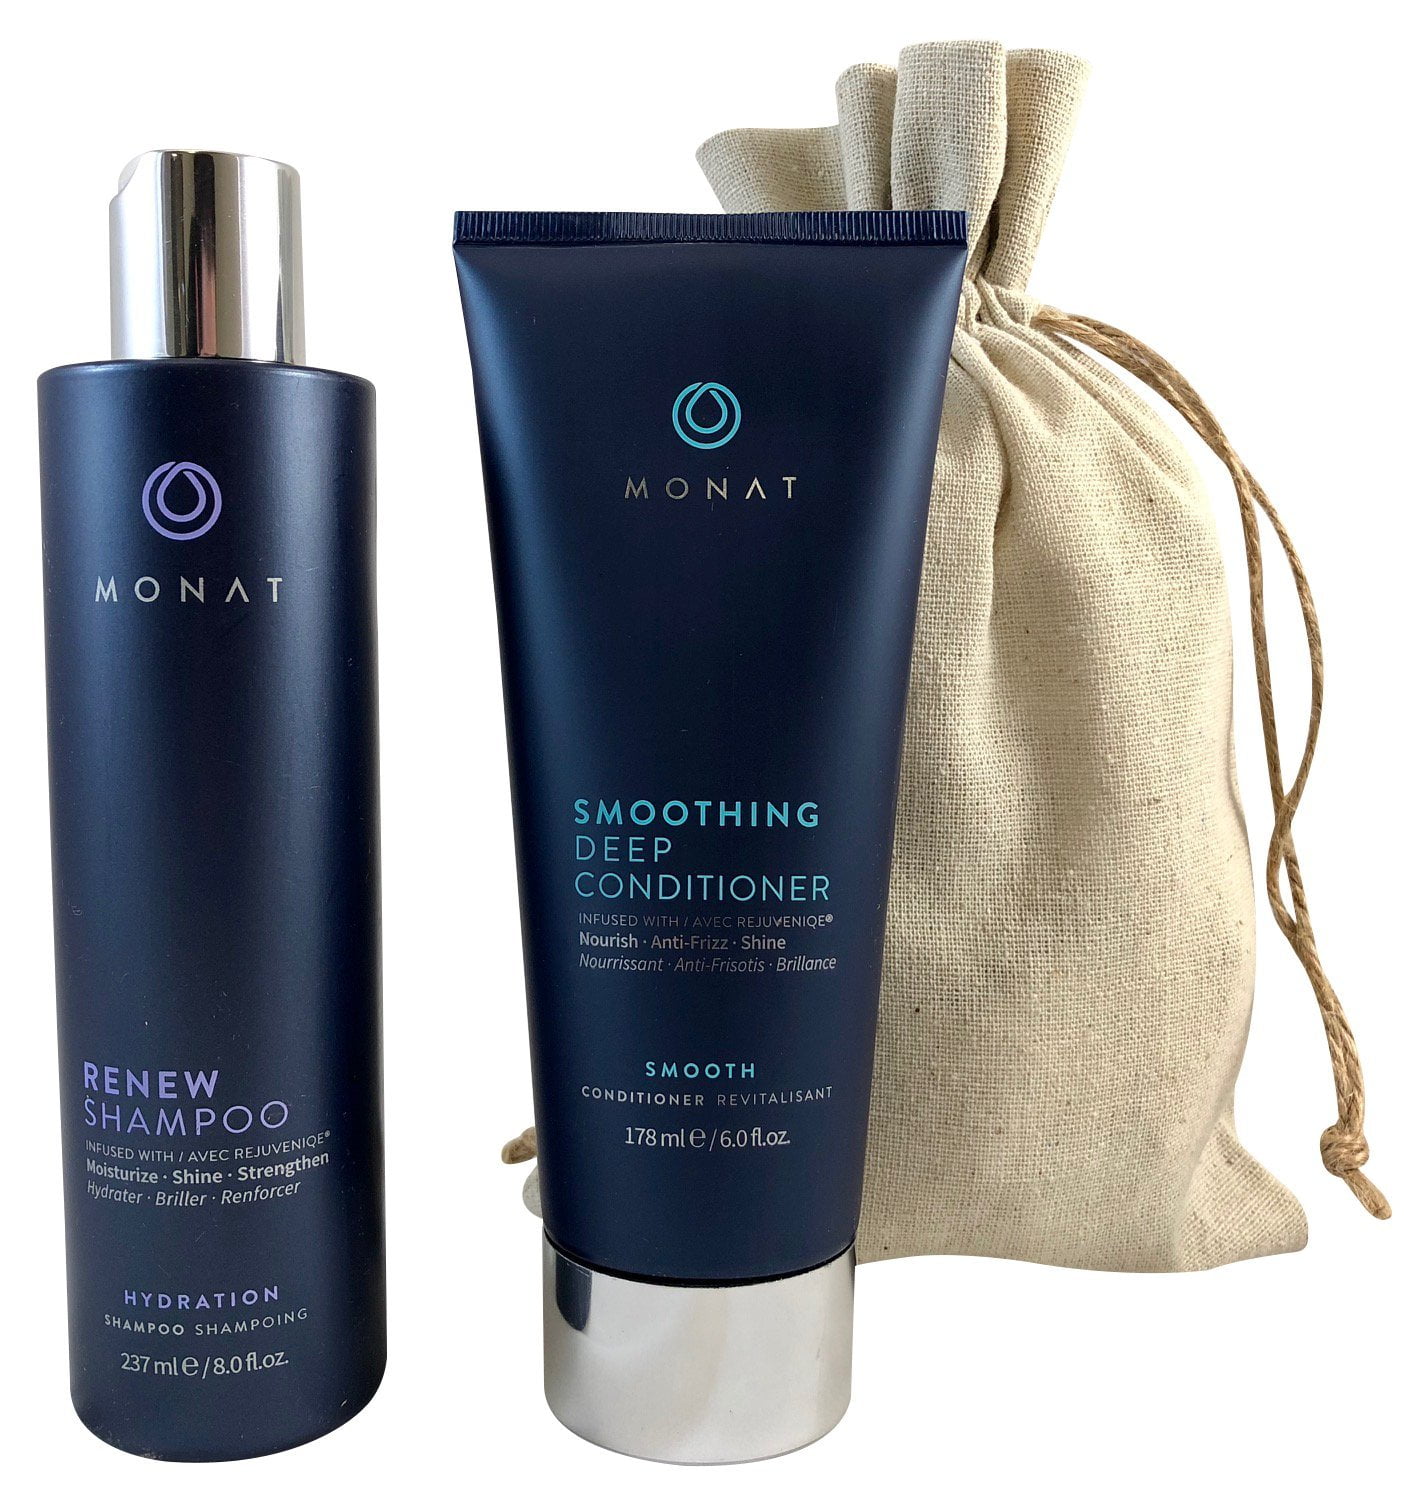 Monat Renew Shampoo and Smoothing Deep Conditioner with FREE Linen Bag  Bundle - Walmart.com